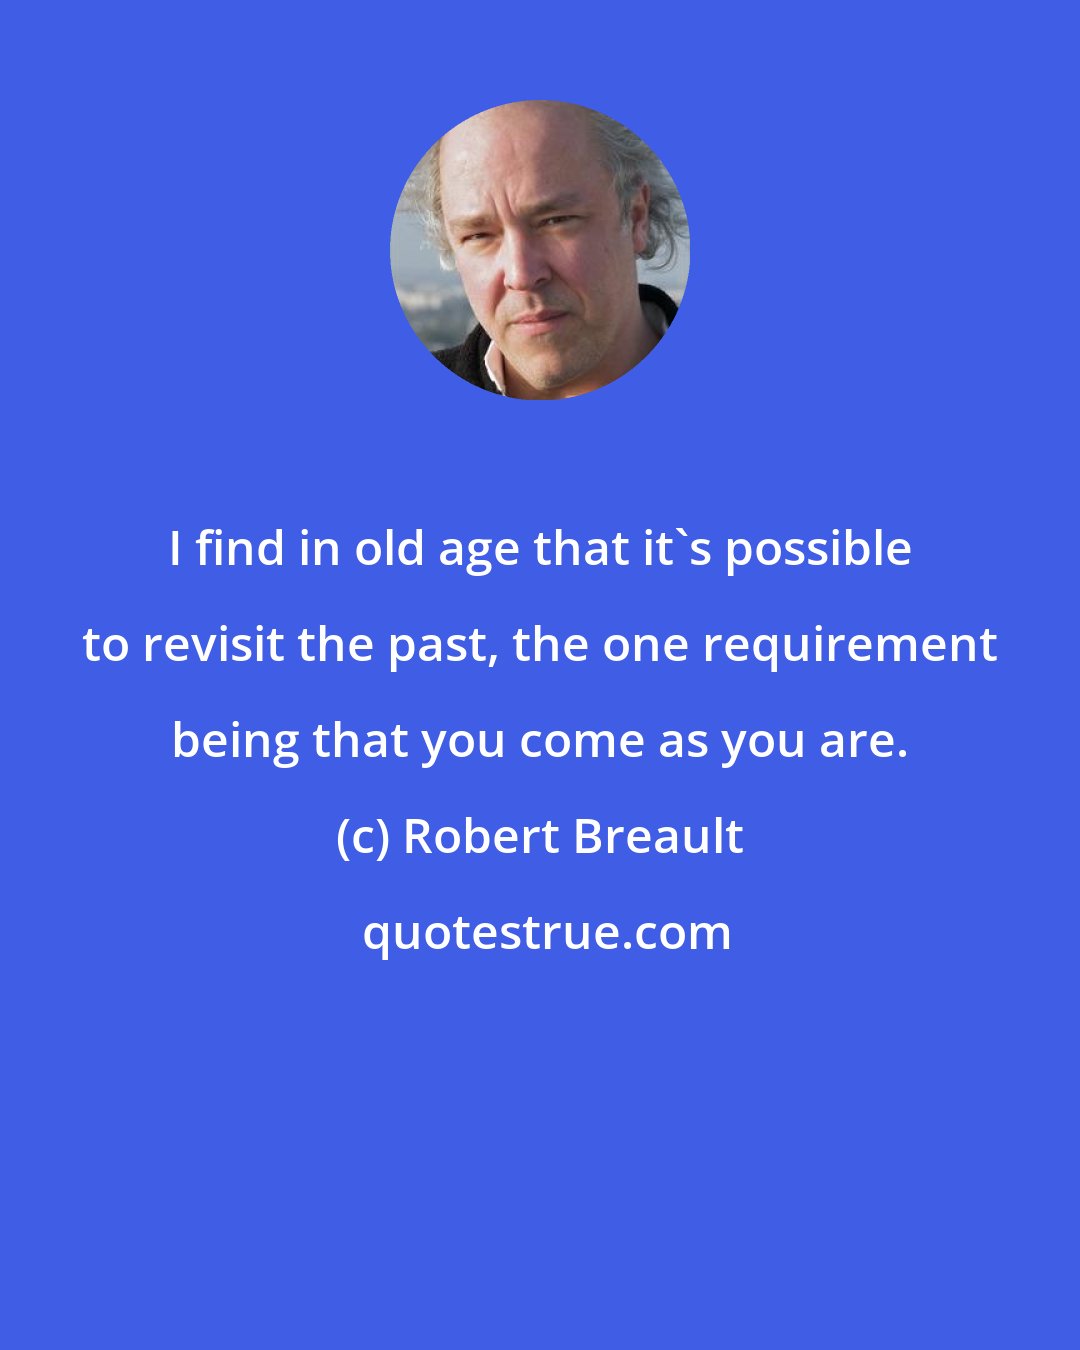 Robert Breault: I find in old age that it's possible to revisit the past, the one requirement being that you come as you are.